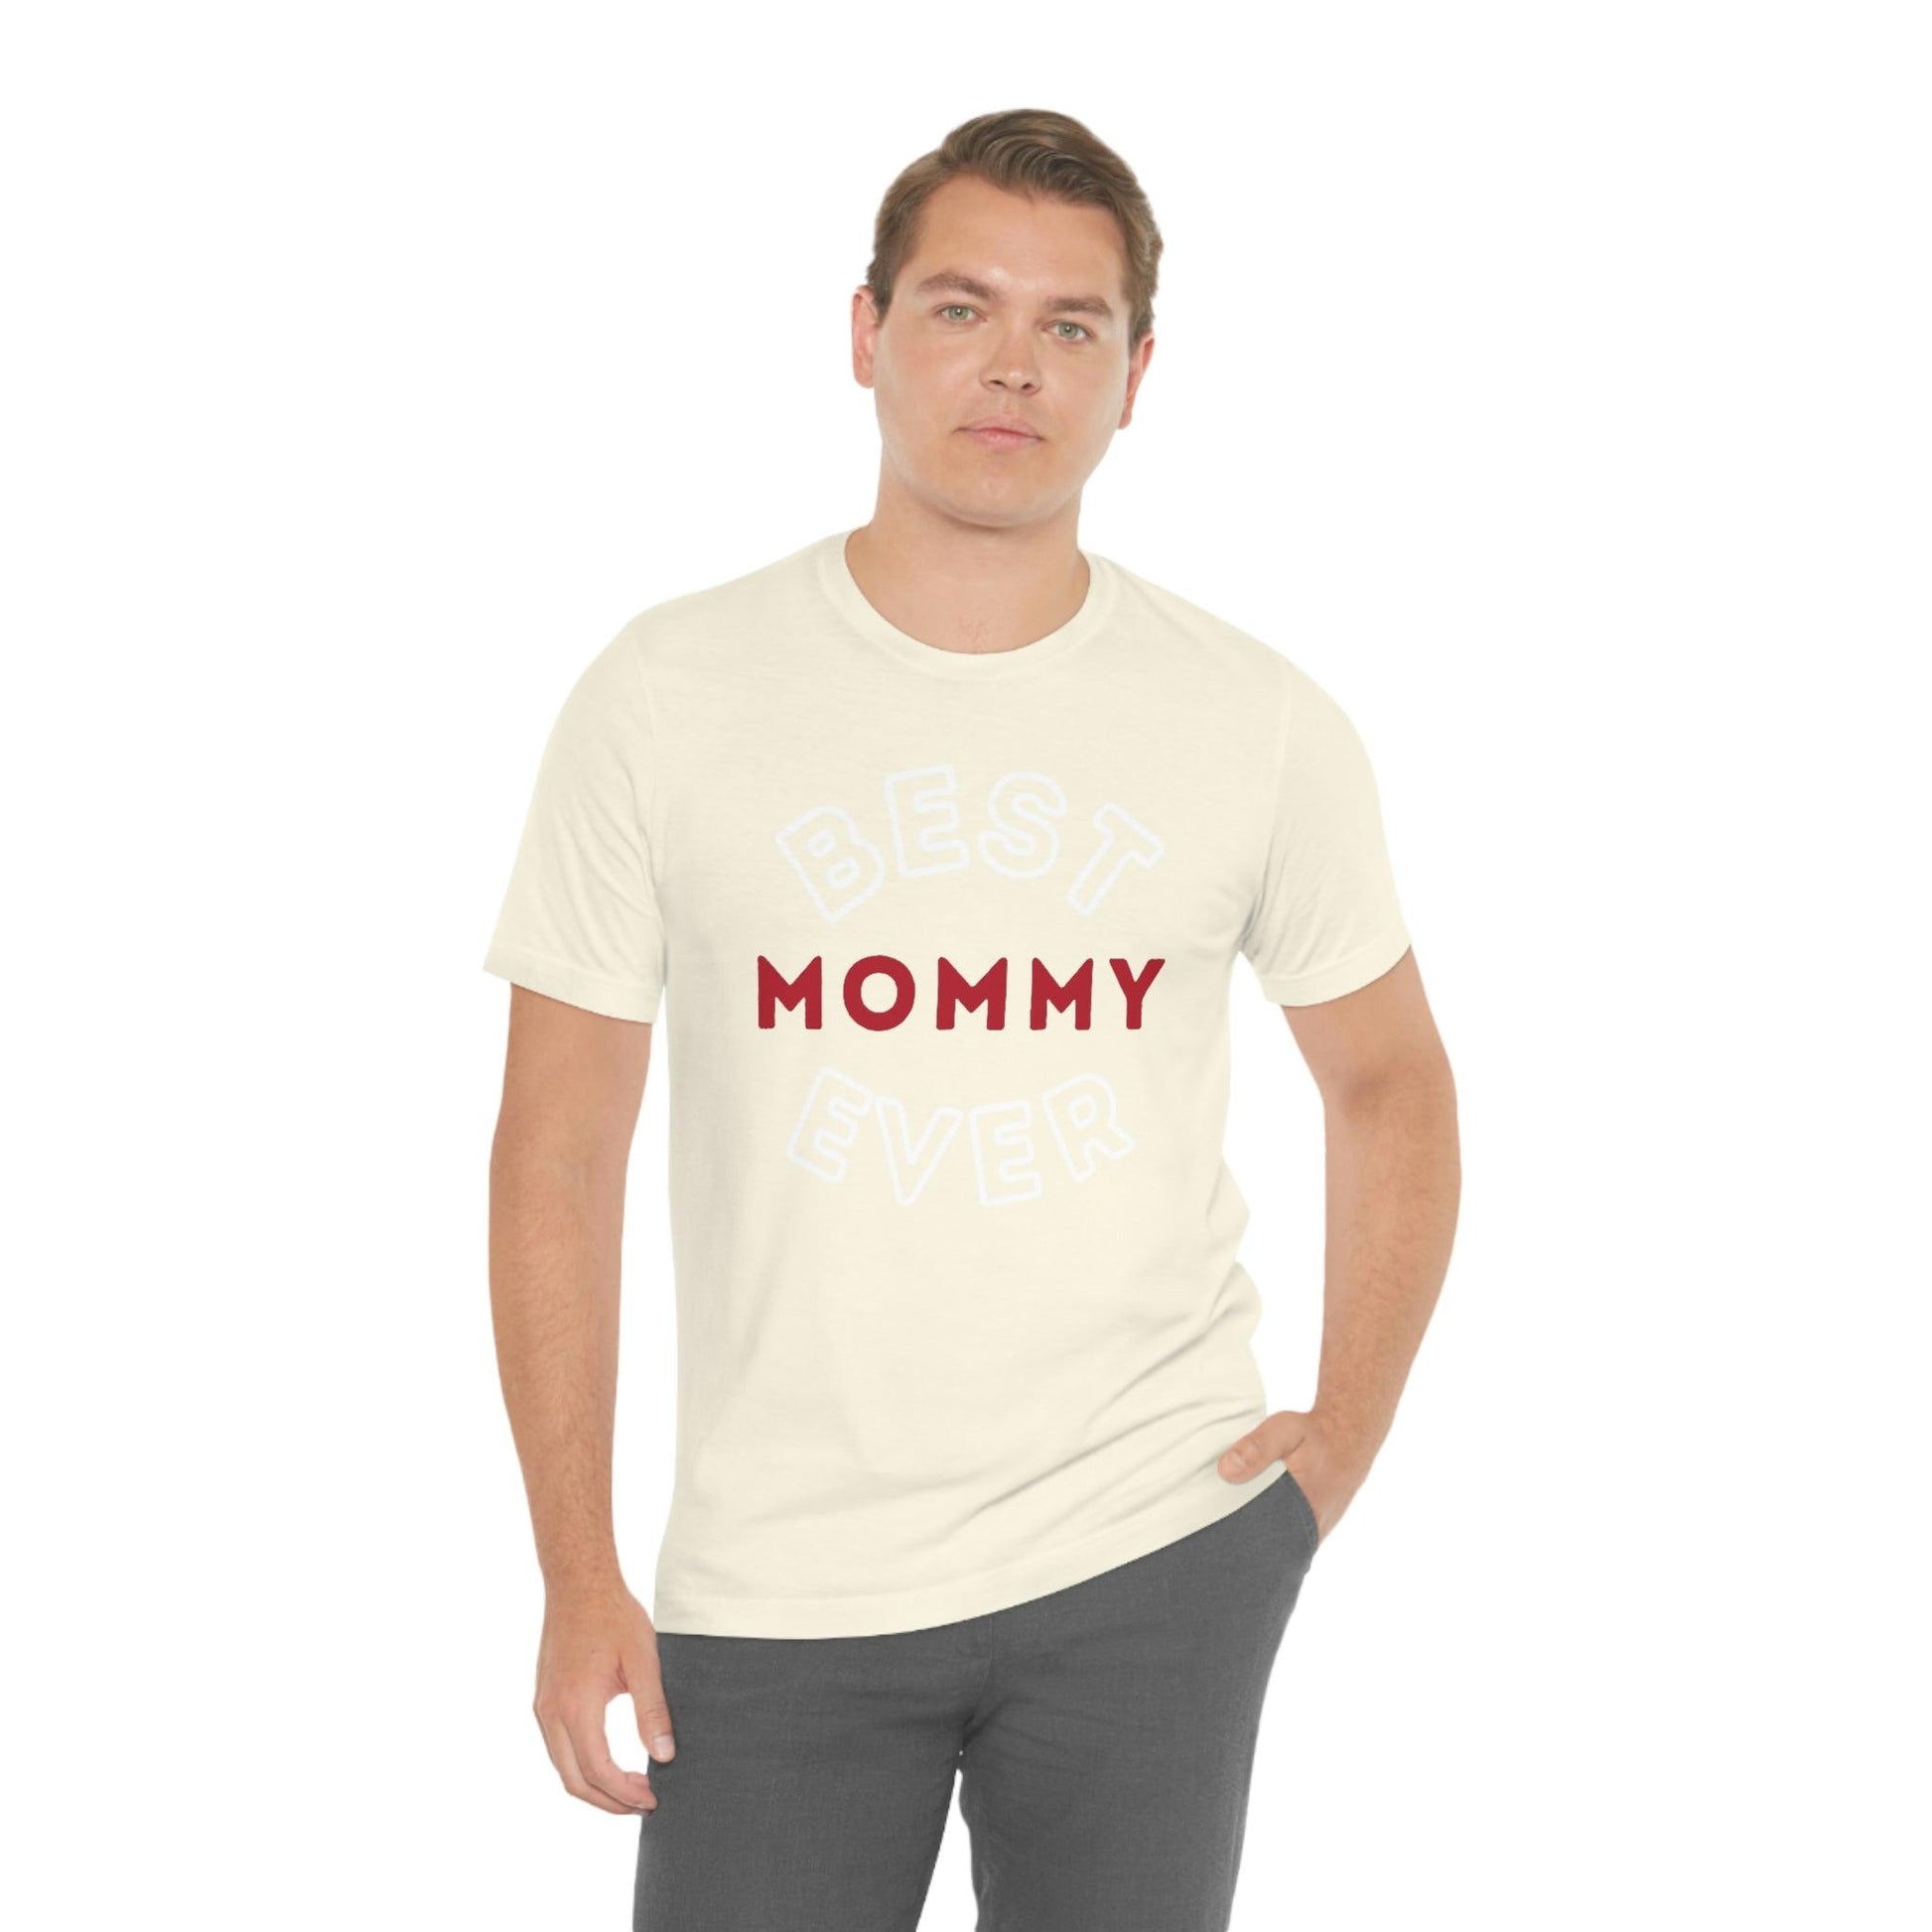 Best Mommy Ever Shirt, Mothers day shirt, gift for mom, Mom birthday gift, Mothers day t shirts, Mothers shirts, Best mothers day gifta - Giftsmojo